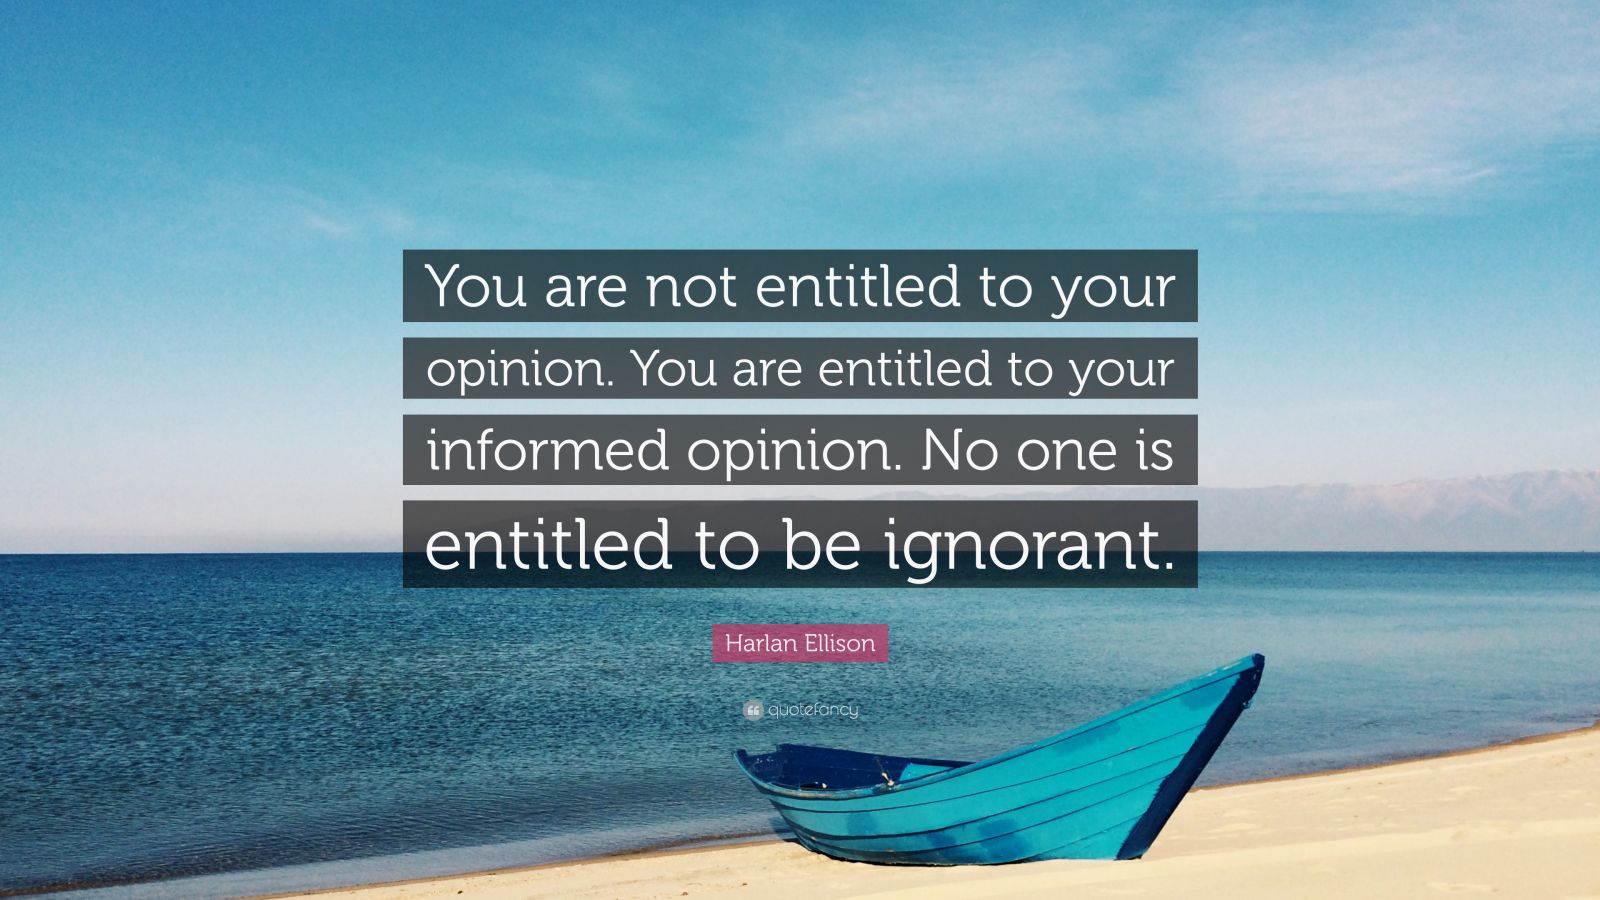 Harlan Ellison Quote: “You are not entitled to your opinion. You are